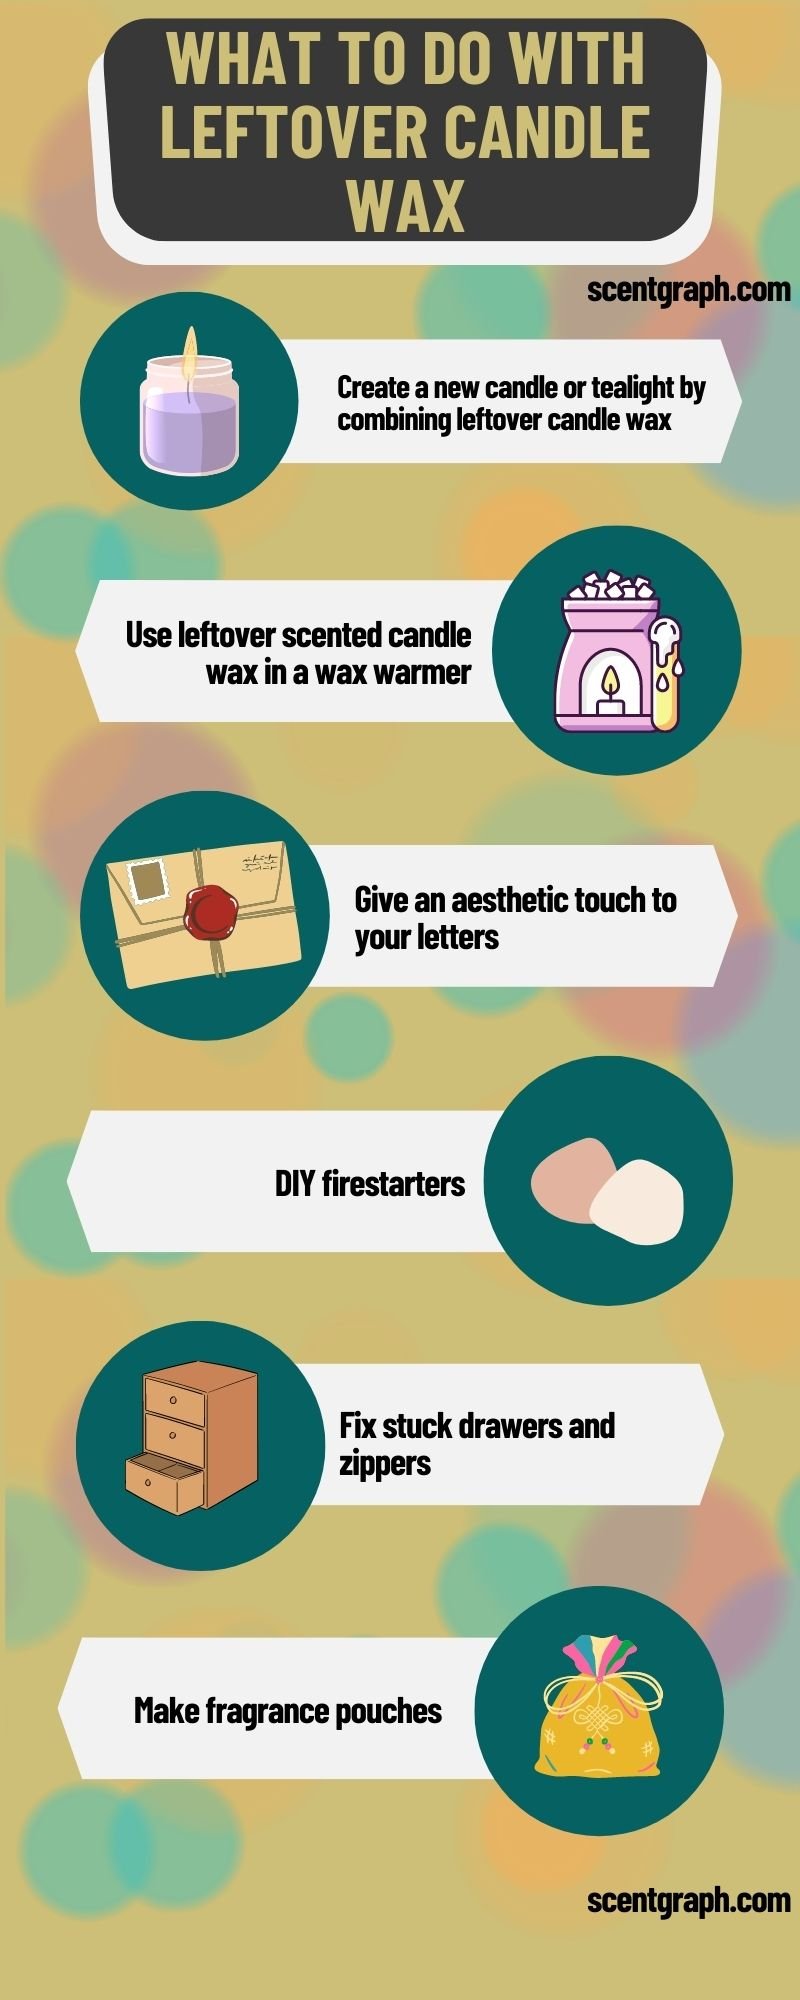 What To Do With Leftover Candle Wax - infographic